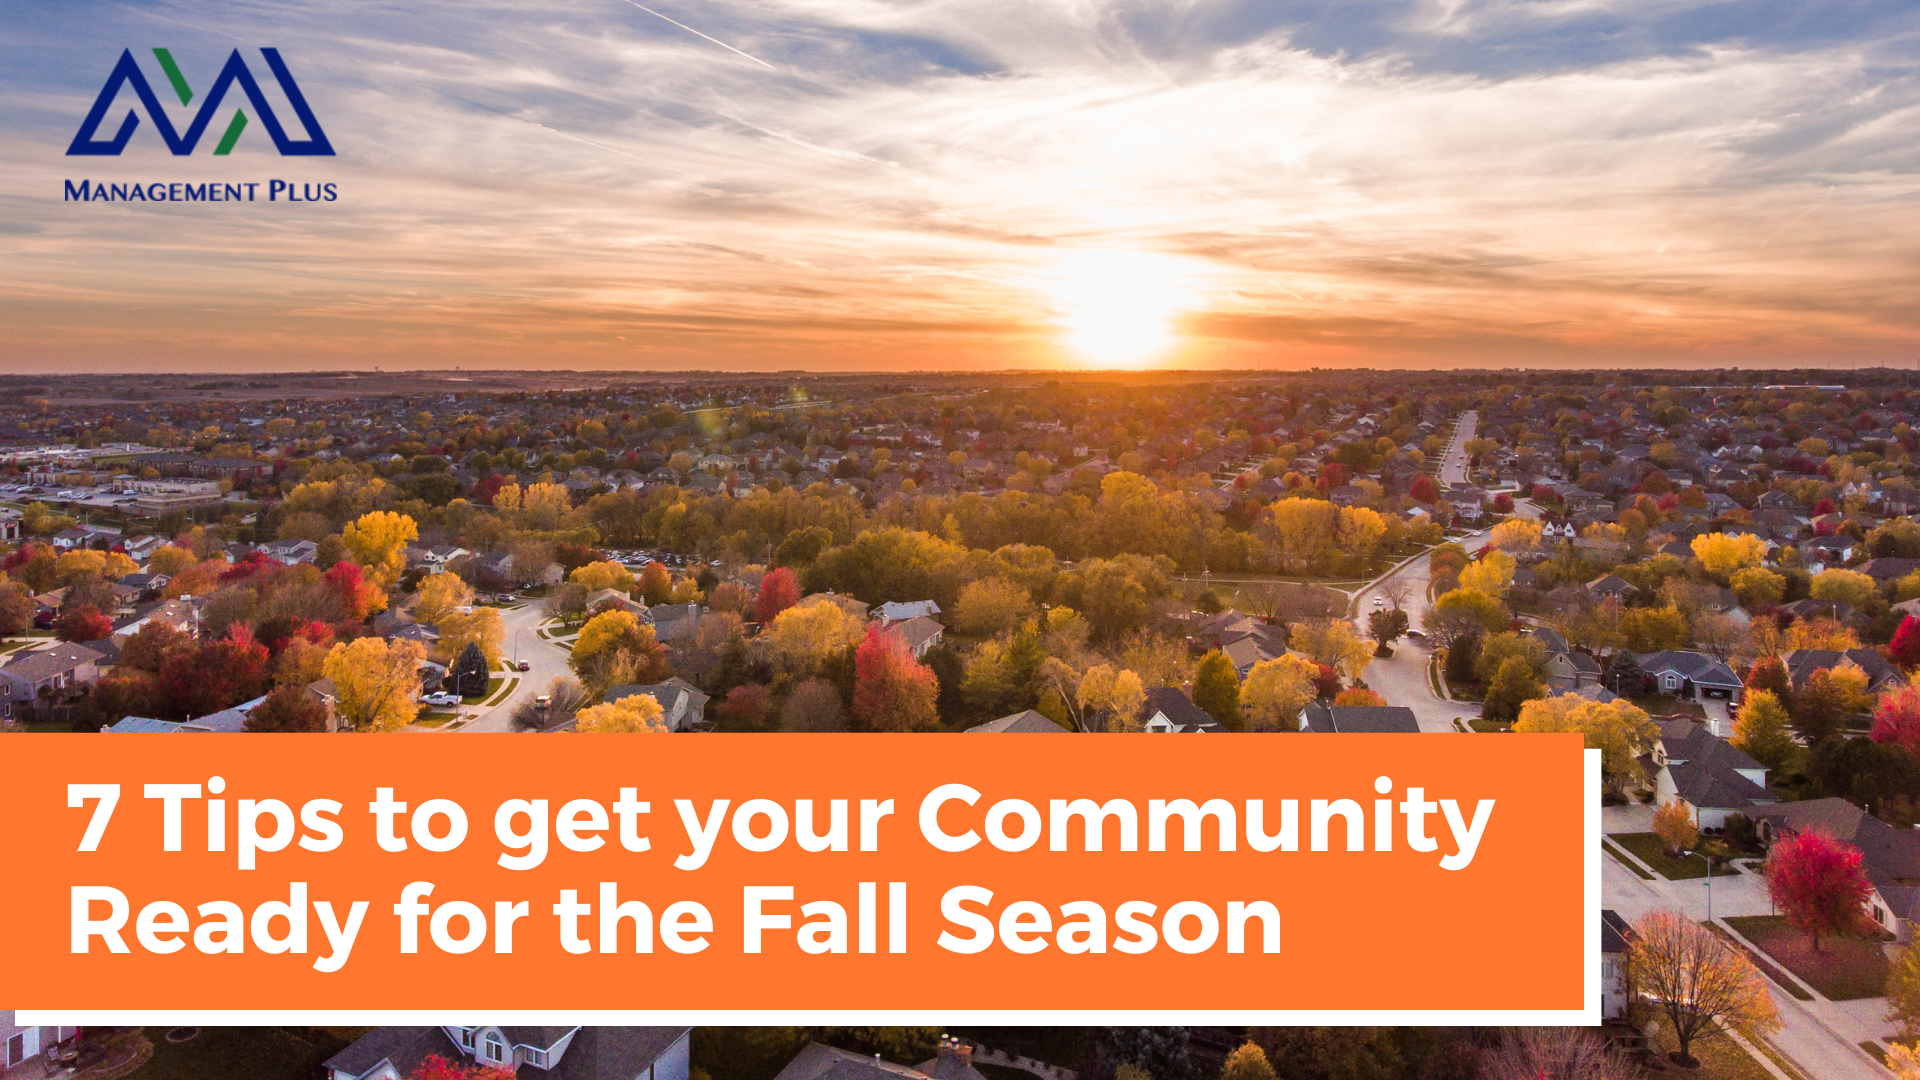 Aerial view of a neighborhood as the sun sets. The text reads, "7 Tips to get your Community Ready for the Fall Season" 